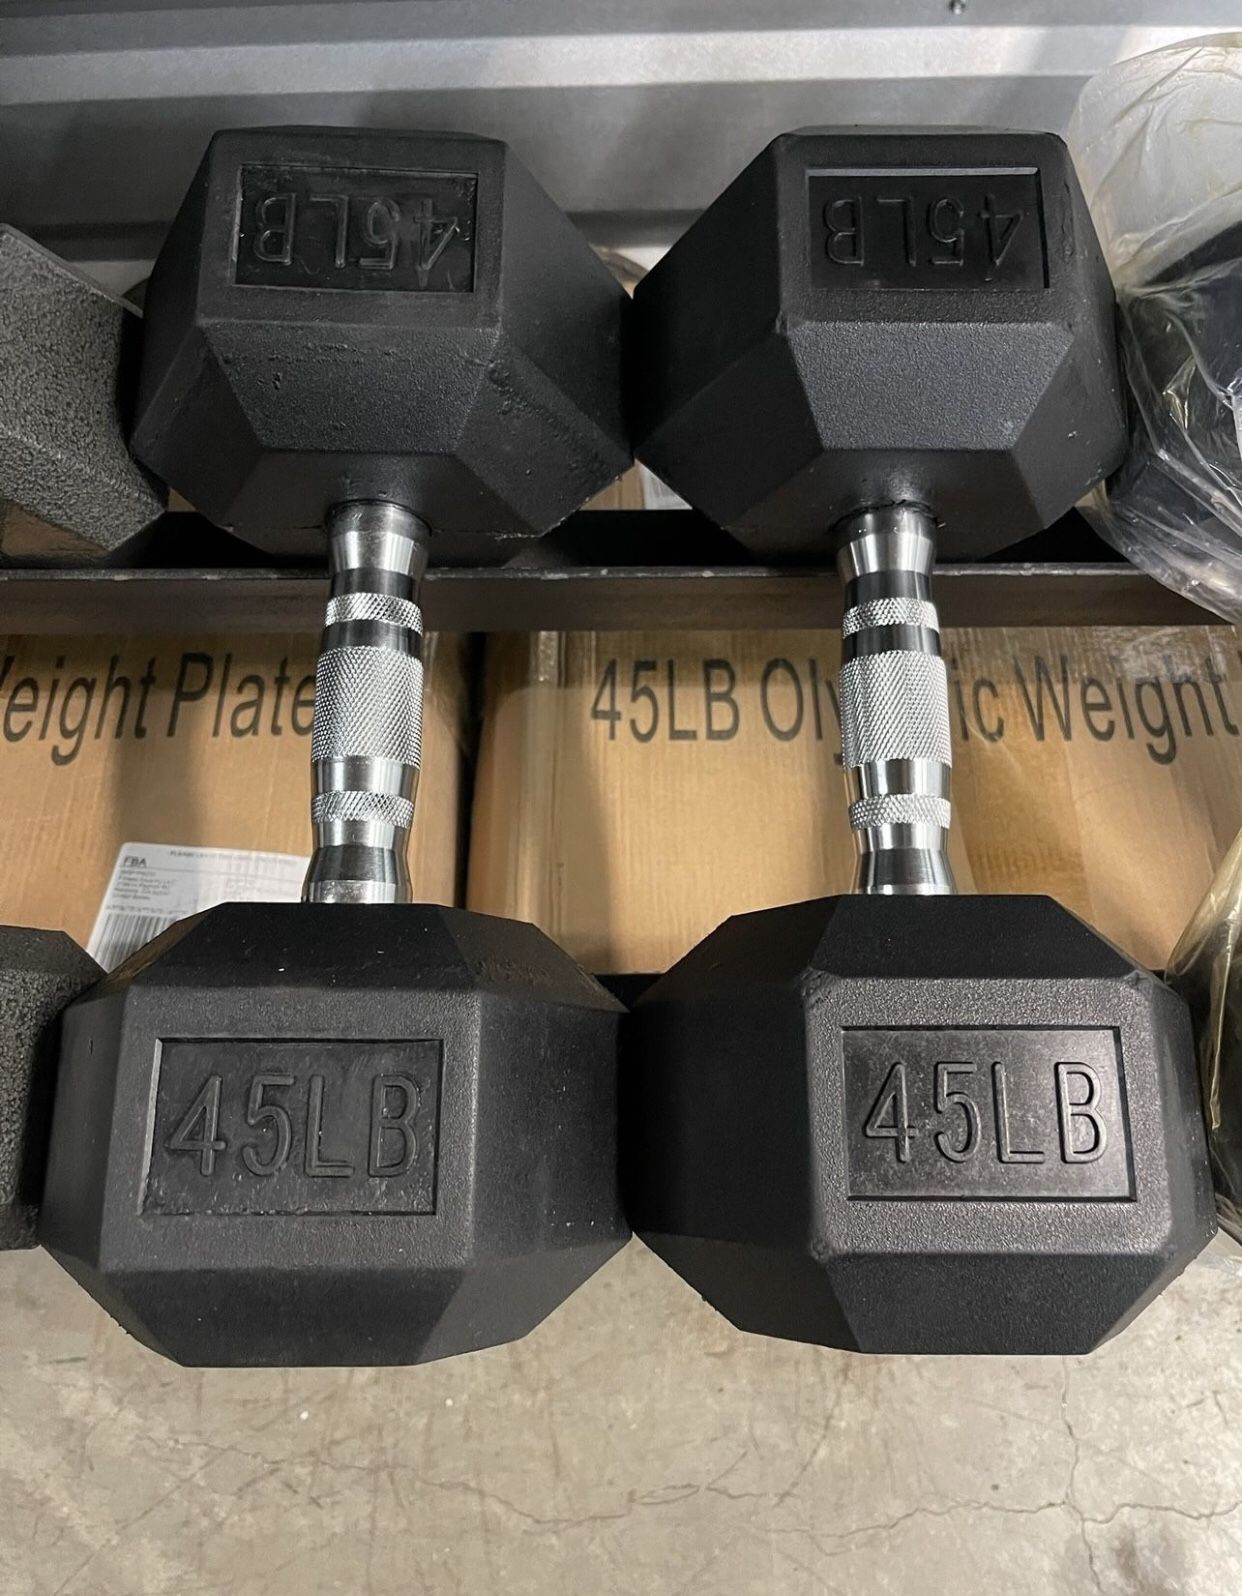 Hex Dumbbells 💪 (2x45Lbs) for $65 Firm on Price.